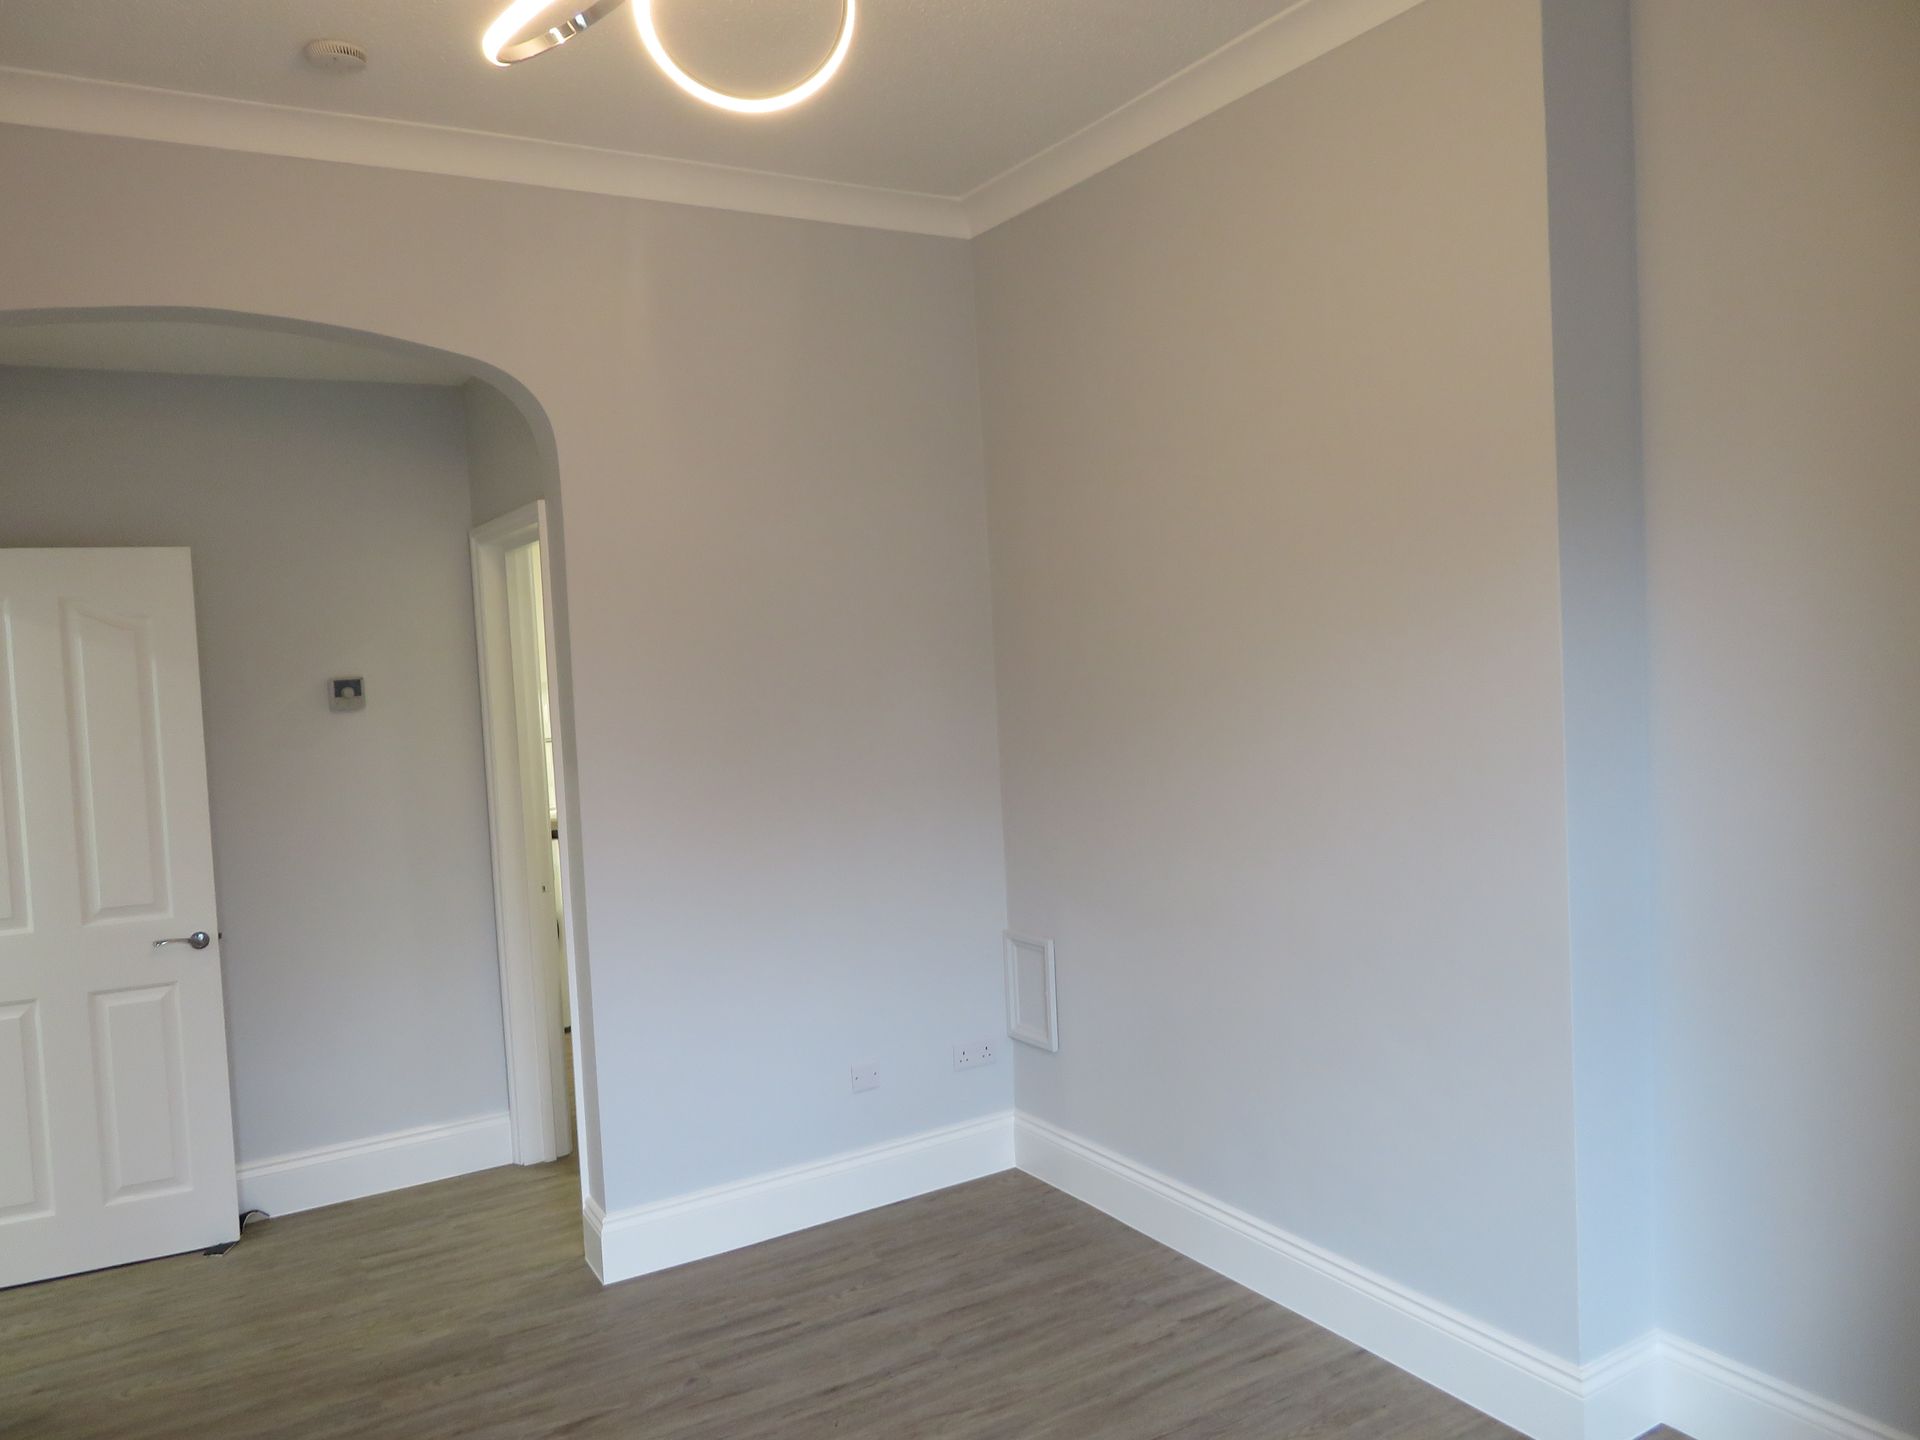 1 bed flat to rent reading